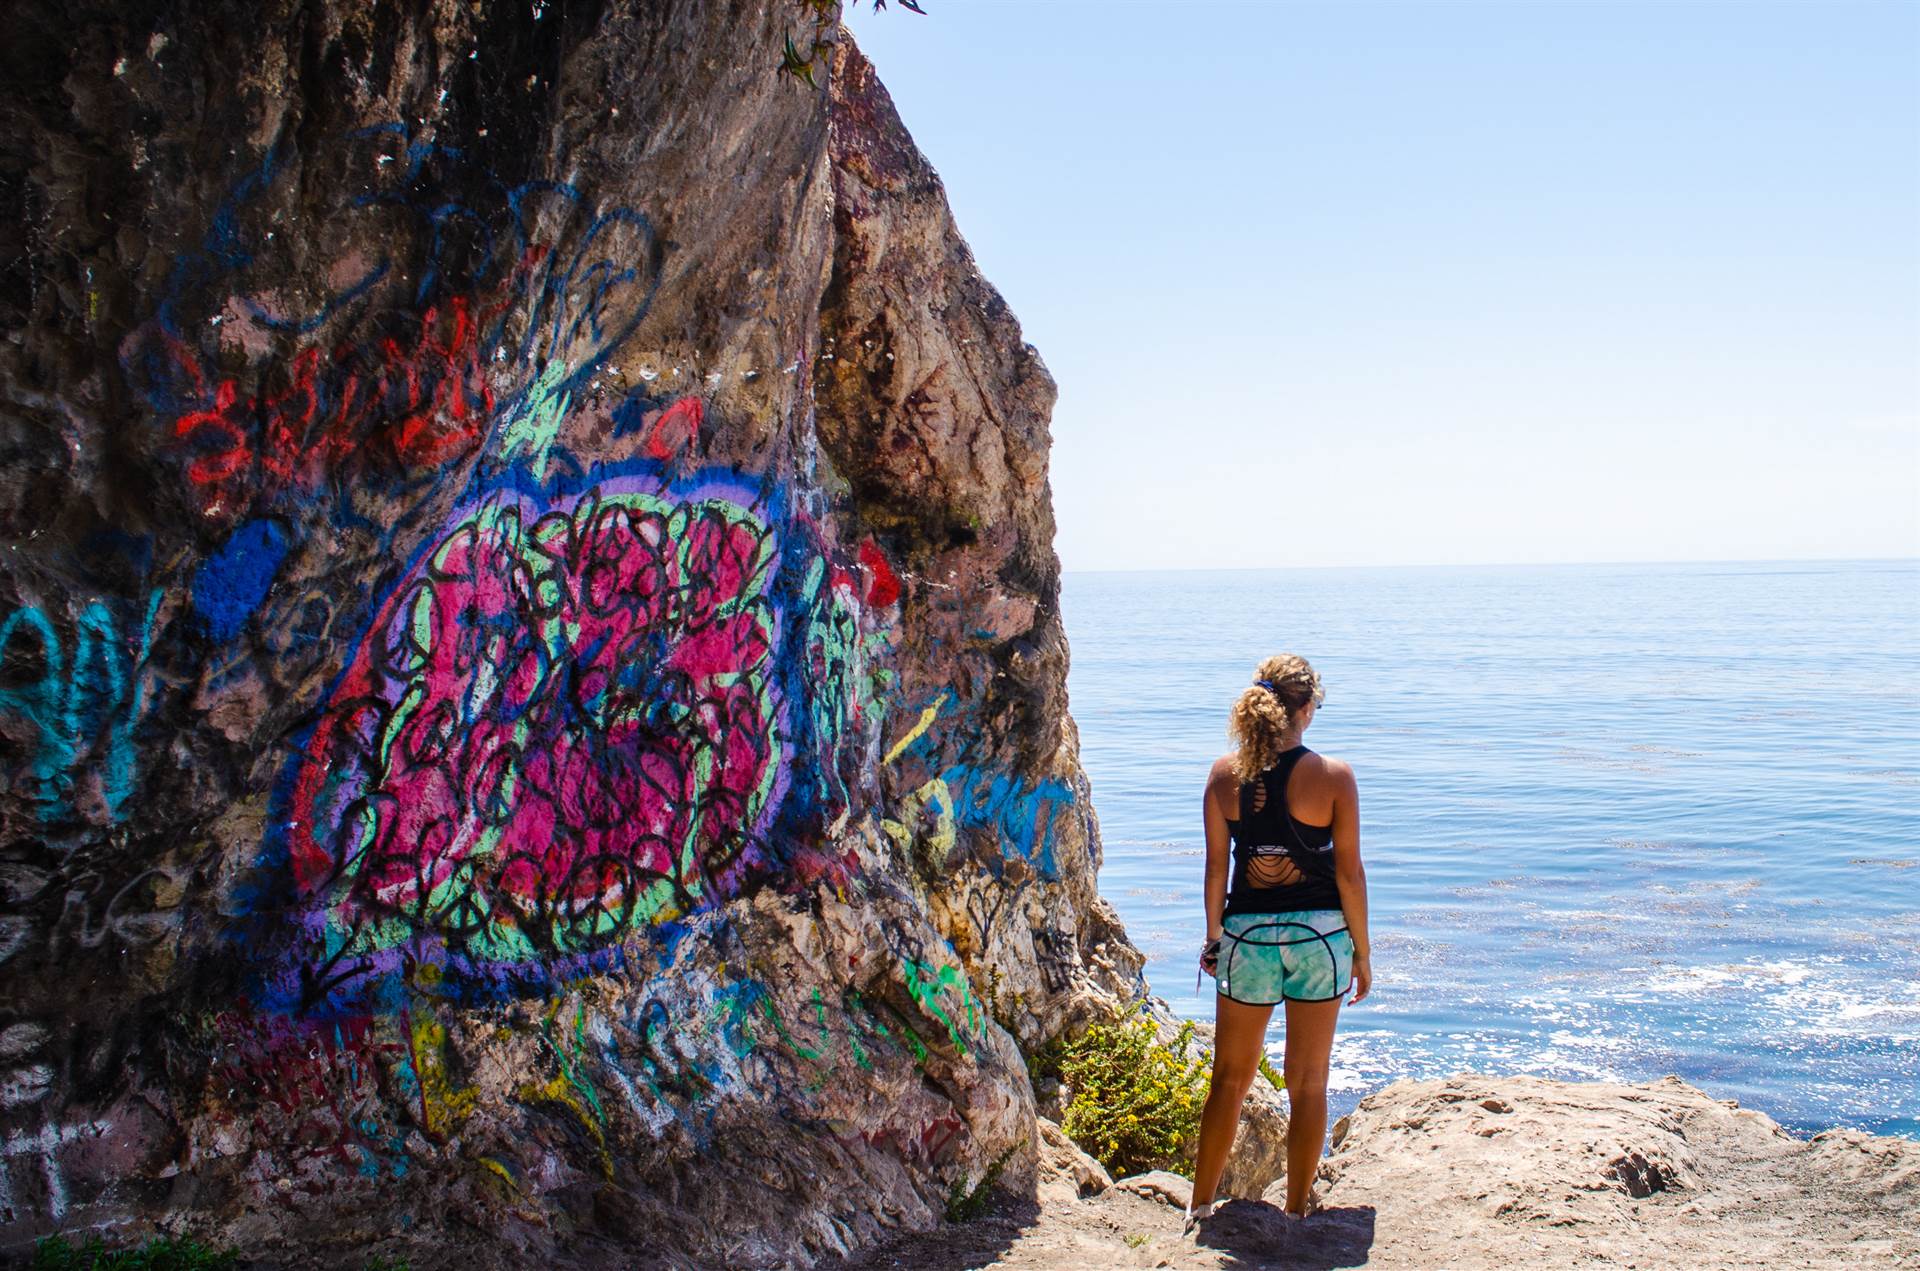 Girl looking at ocean with graffiti rock next to her